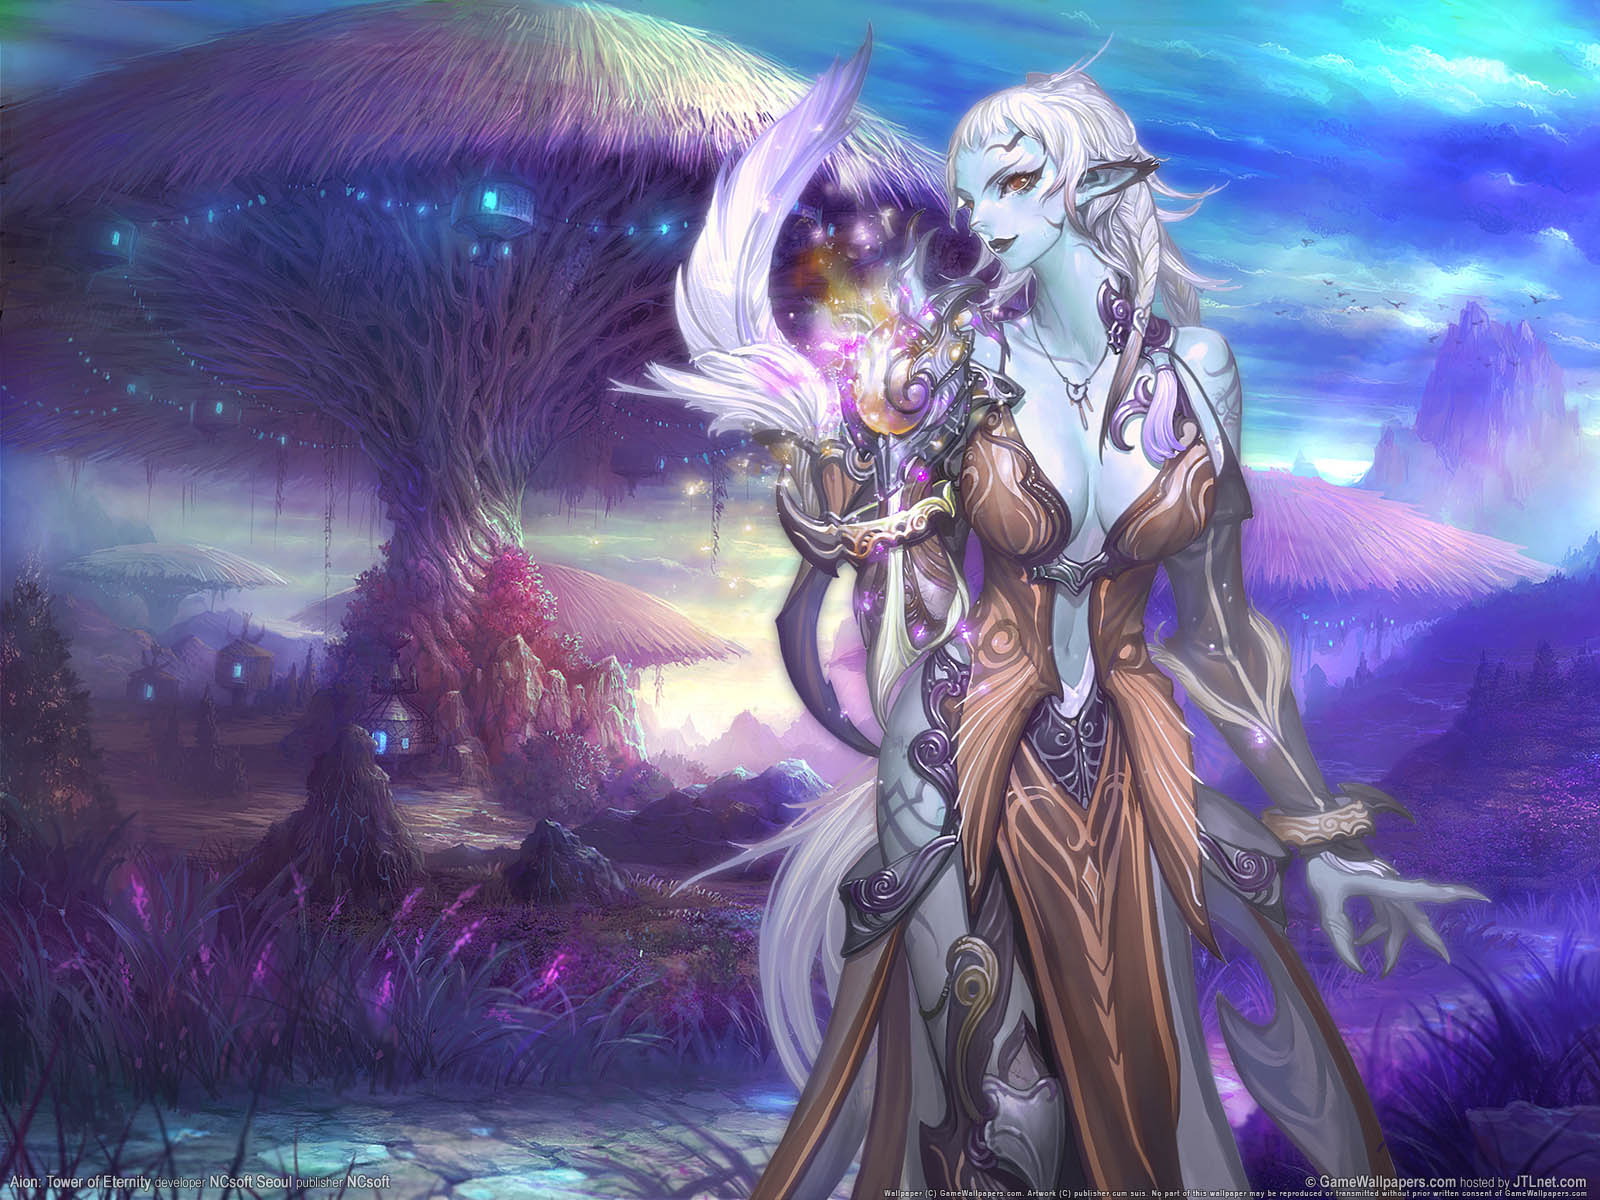 Aion%253A Tower of Eternity wallpaper 10 1600x1200